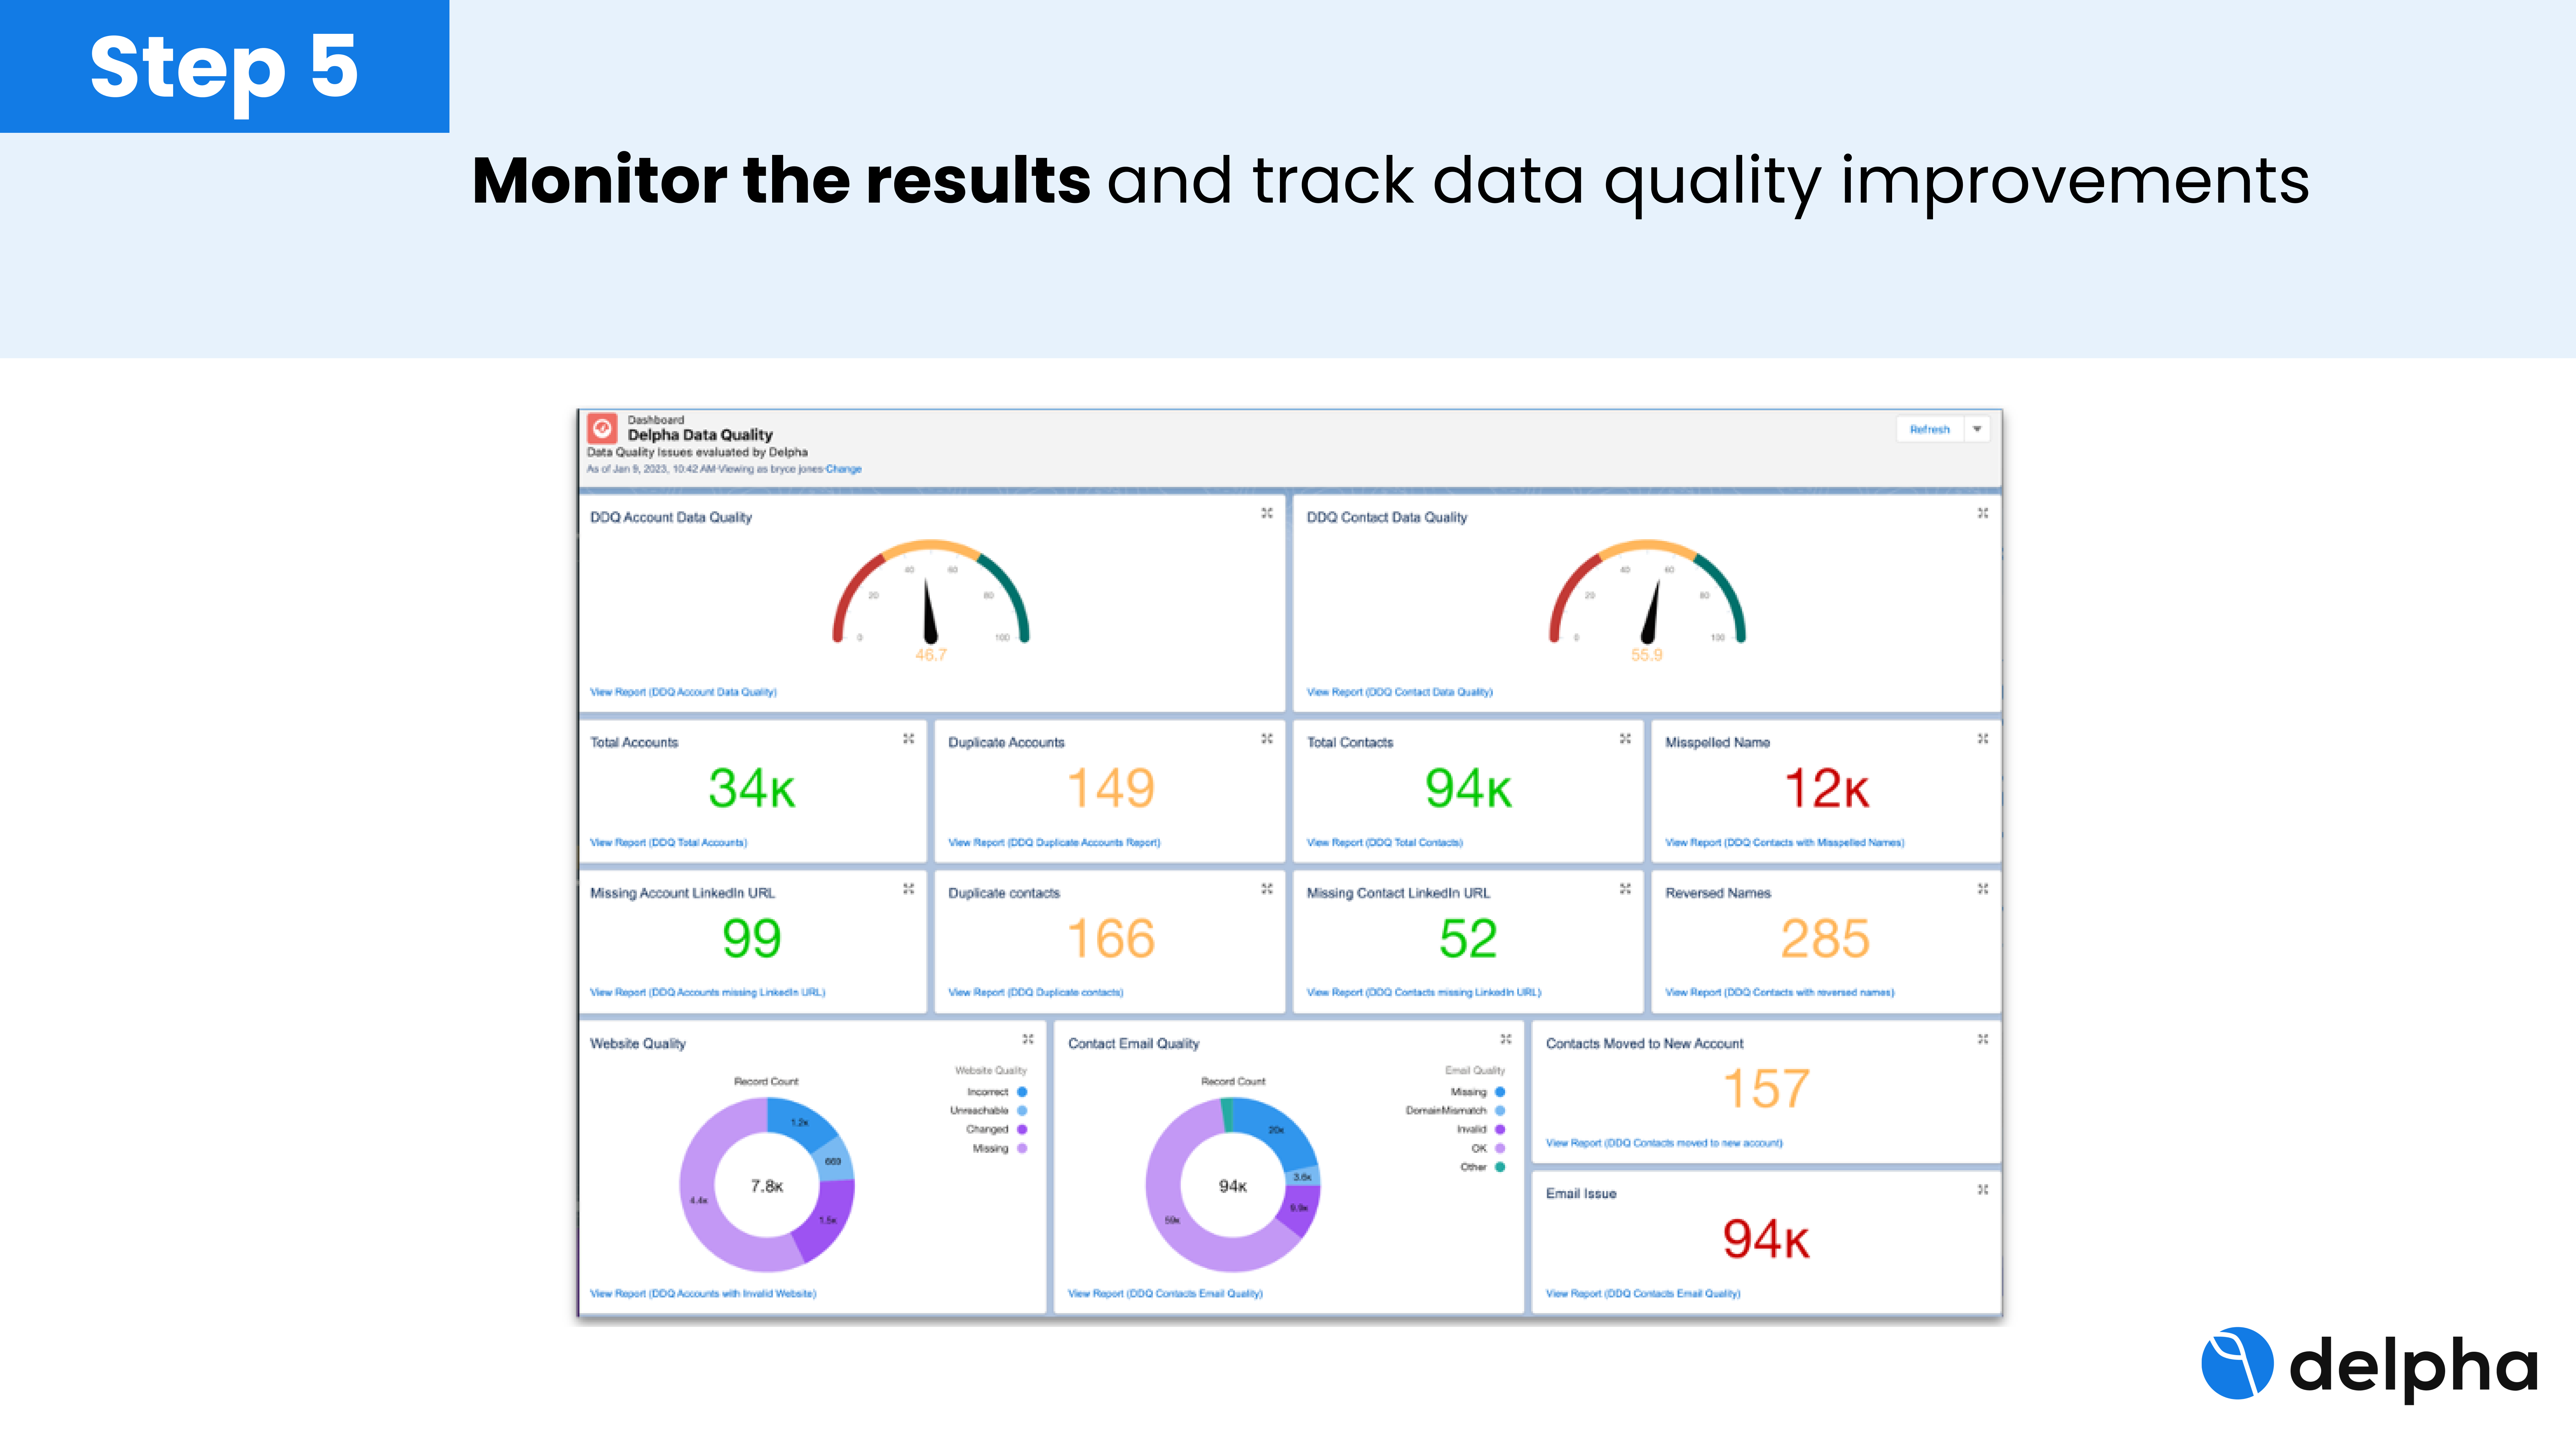 Step 5 to improve data quality is to monitor the results and match to key KPIs